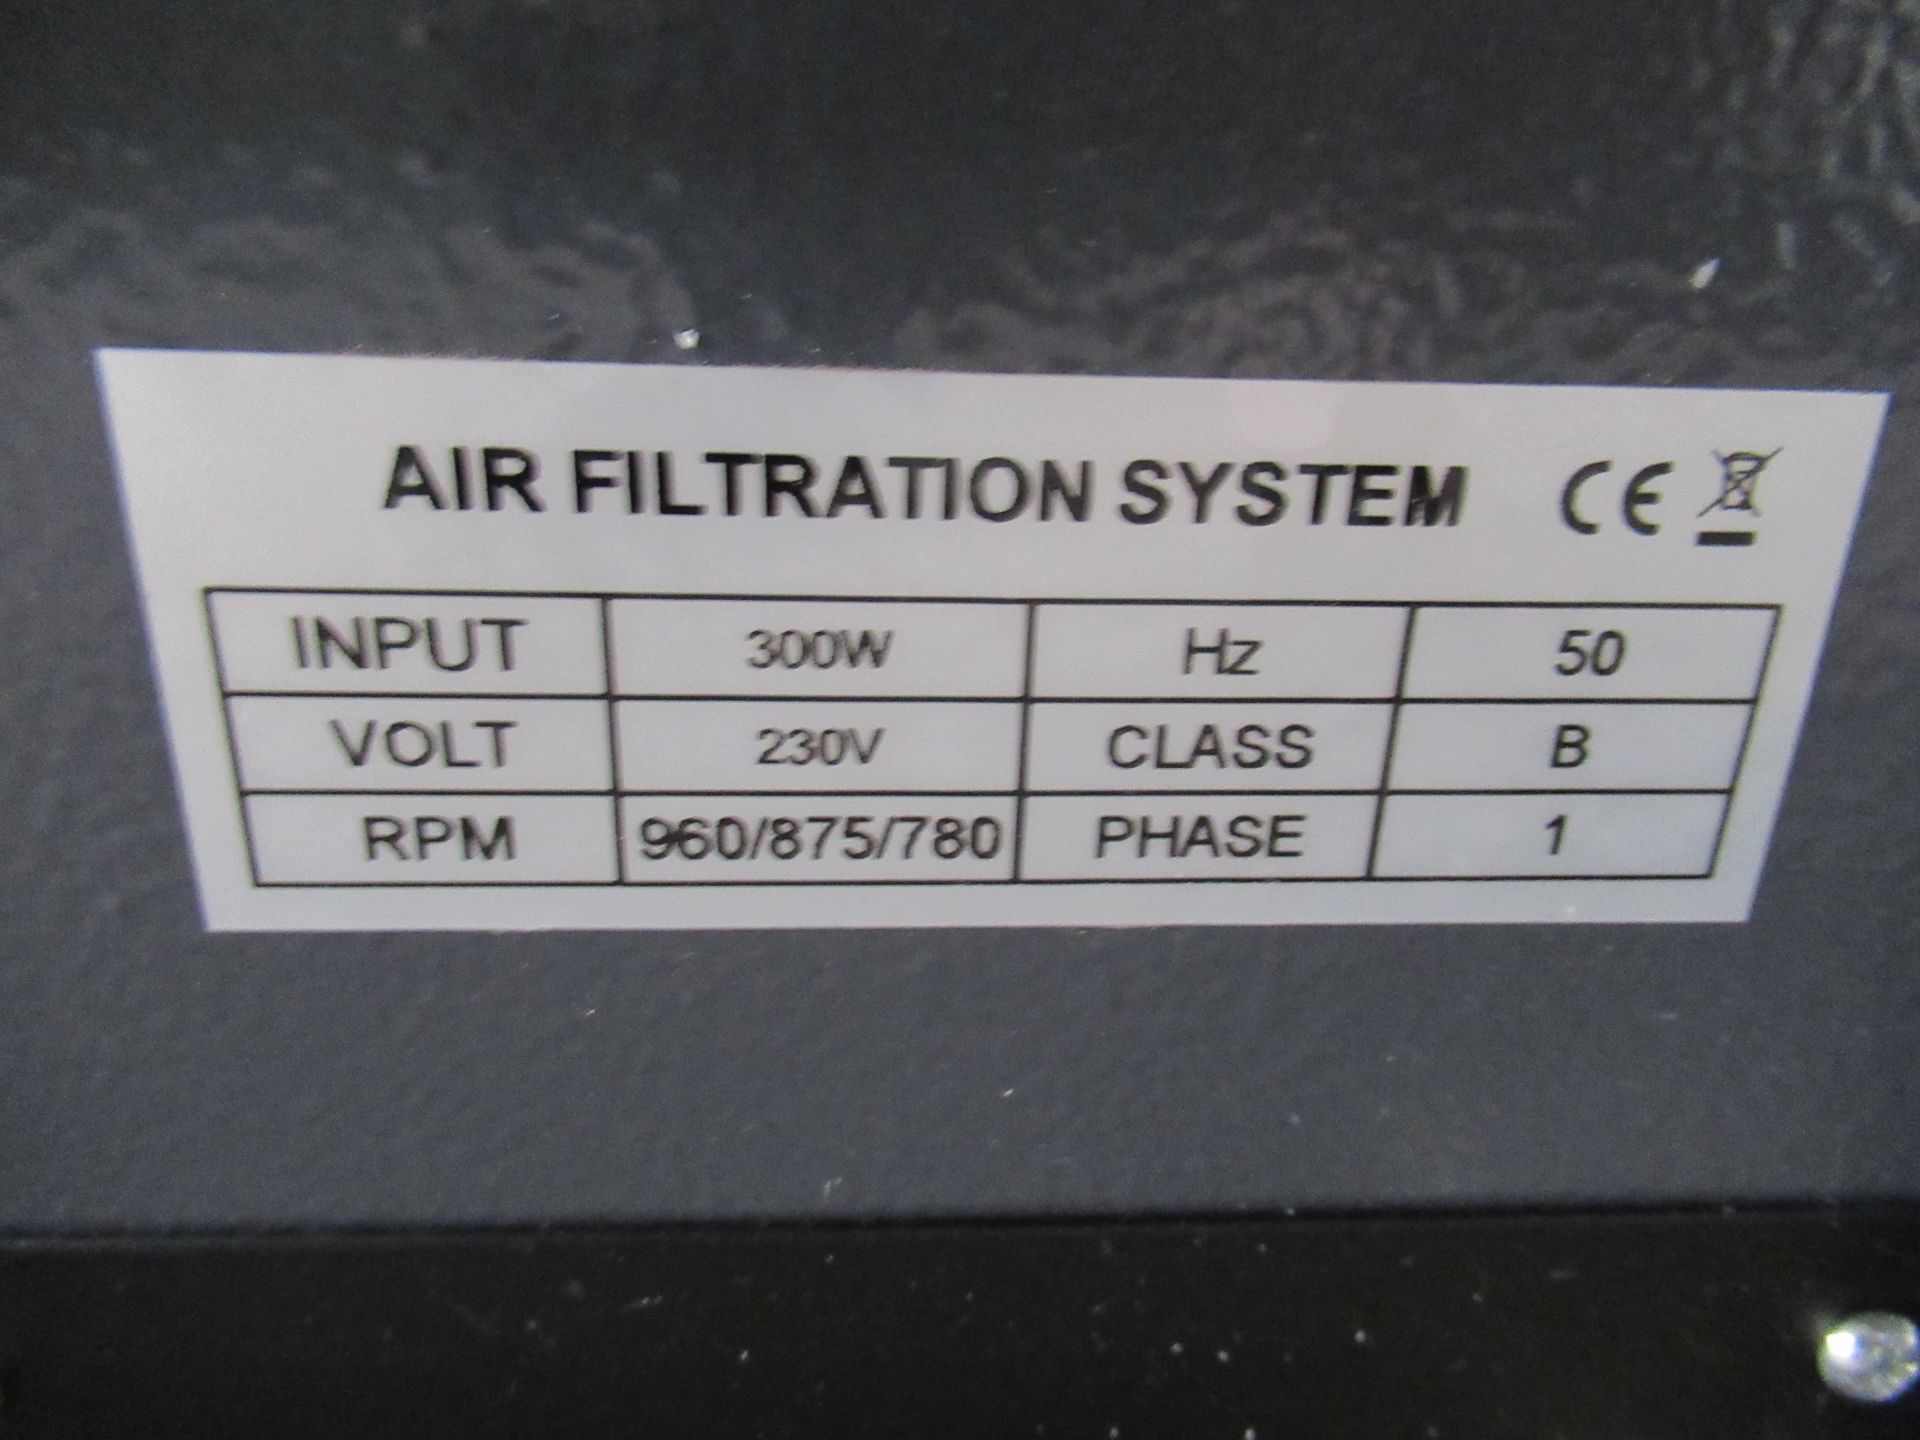 iTech air filtration system, 230V, Class 8 - Image 3 of 3